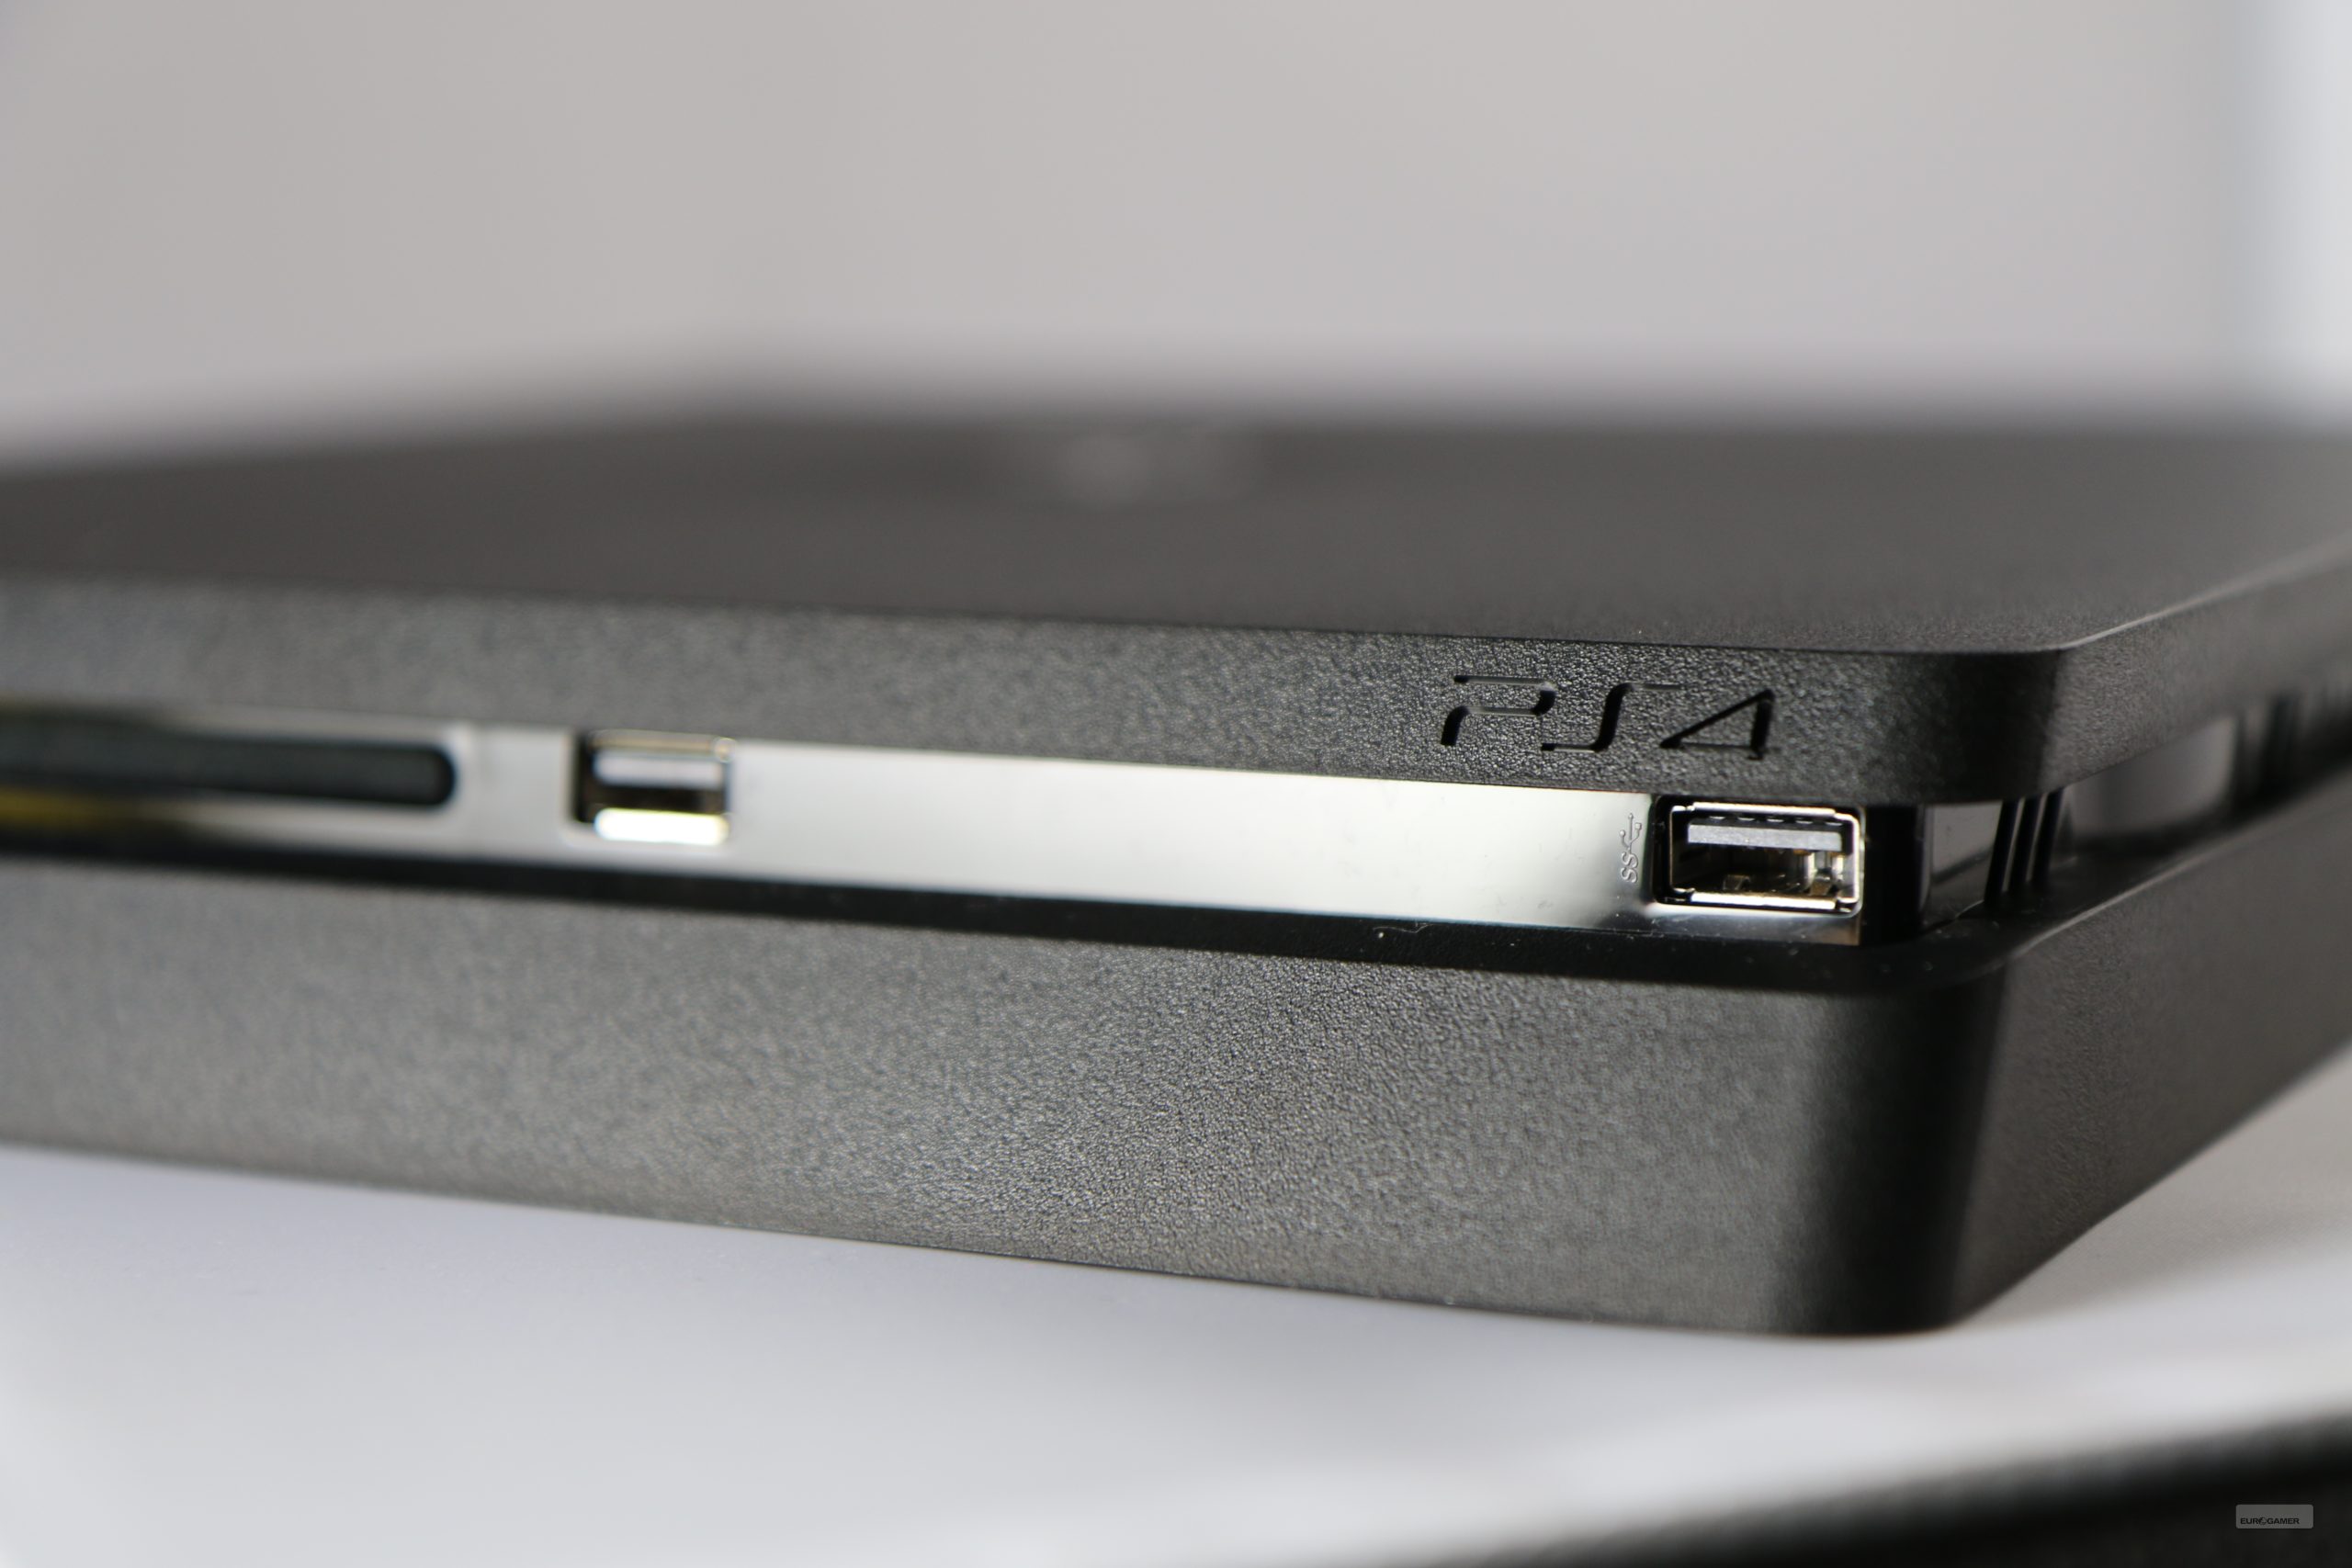 PS4 Slim console leaks online, rumored to be launching mid-September